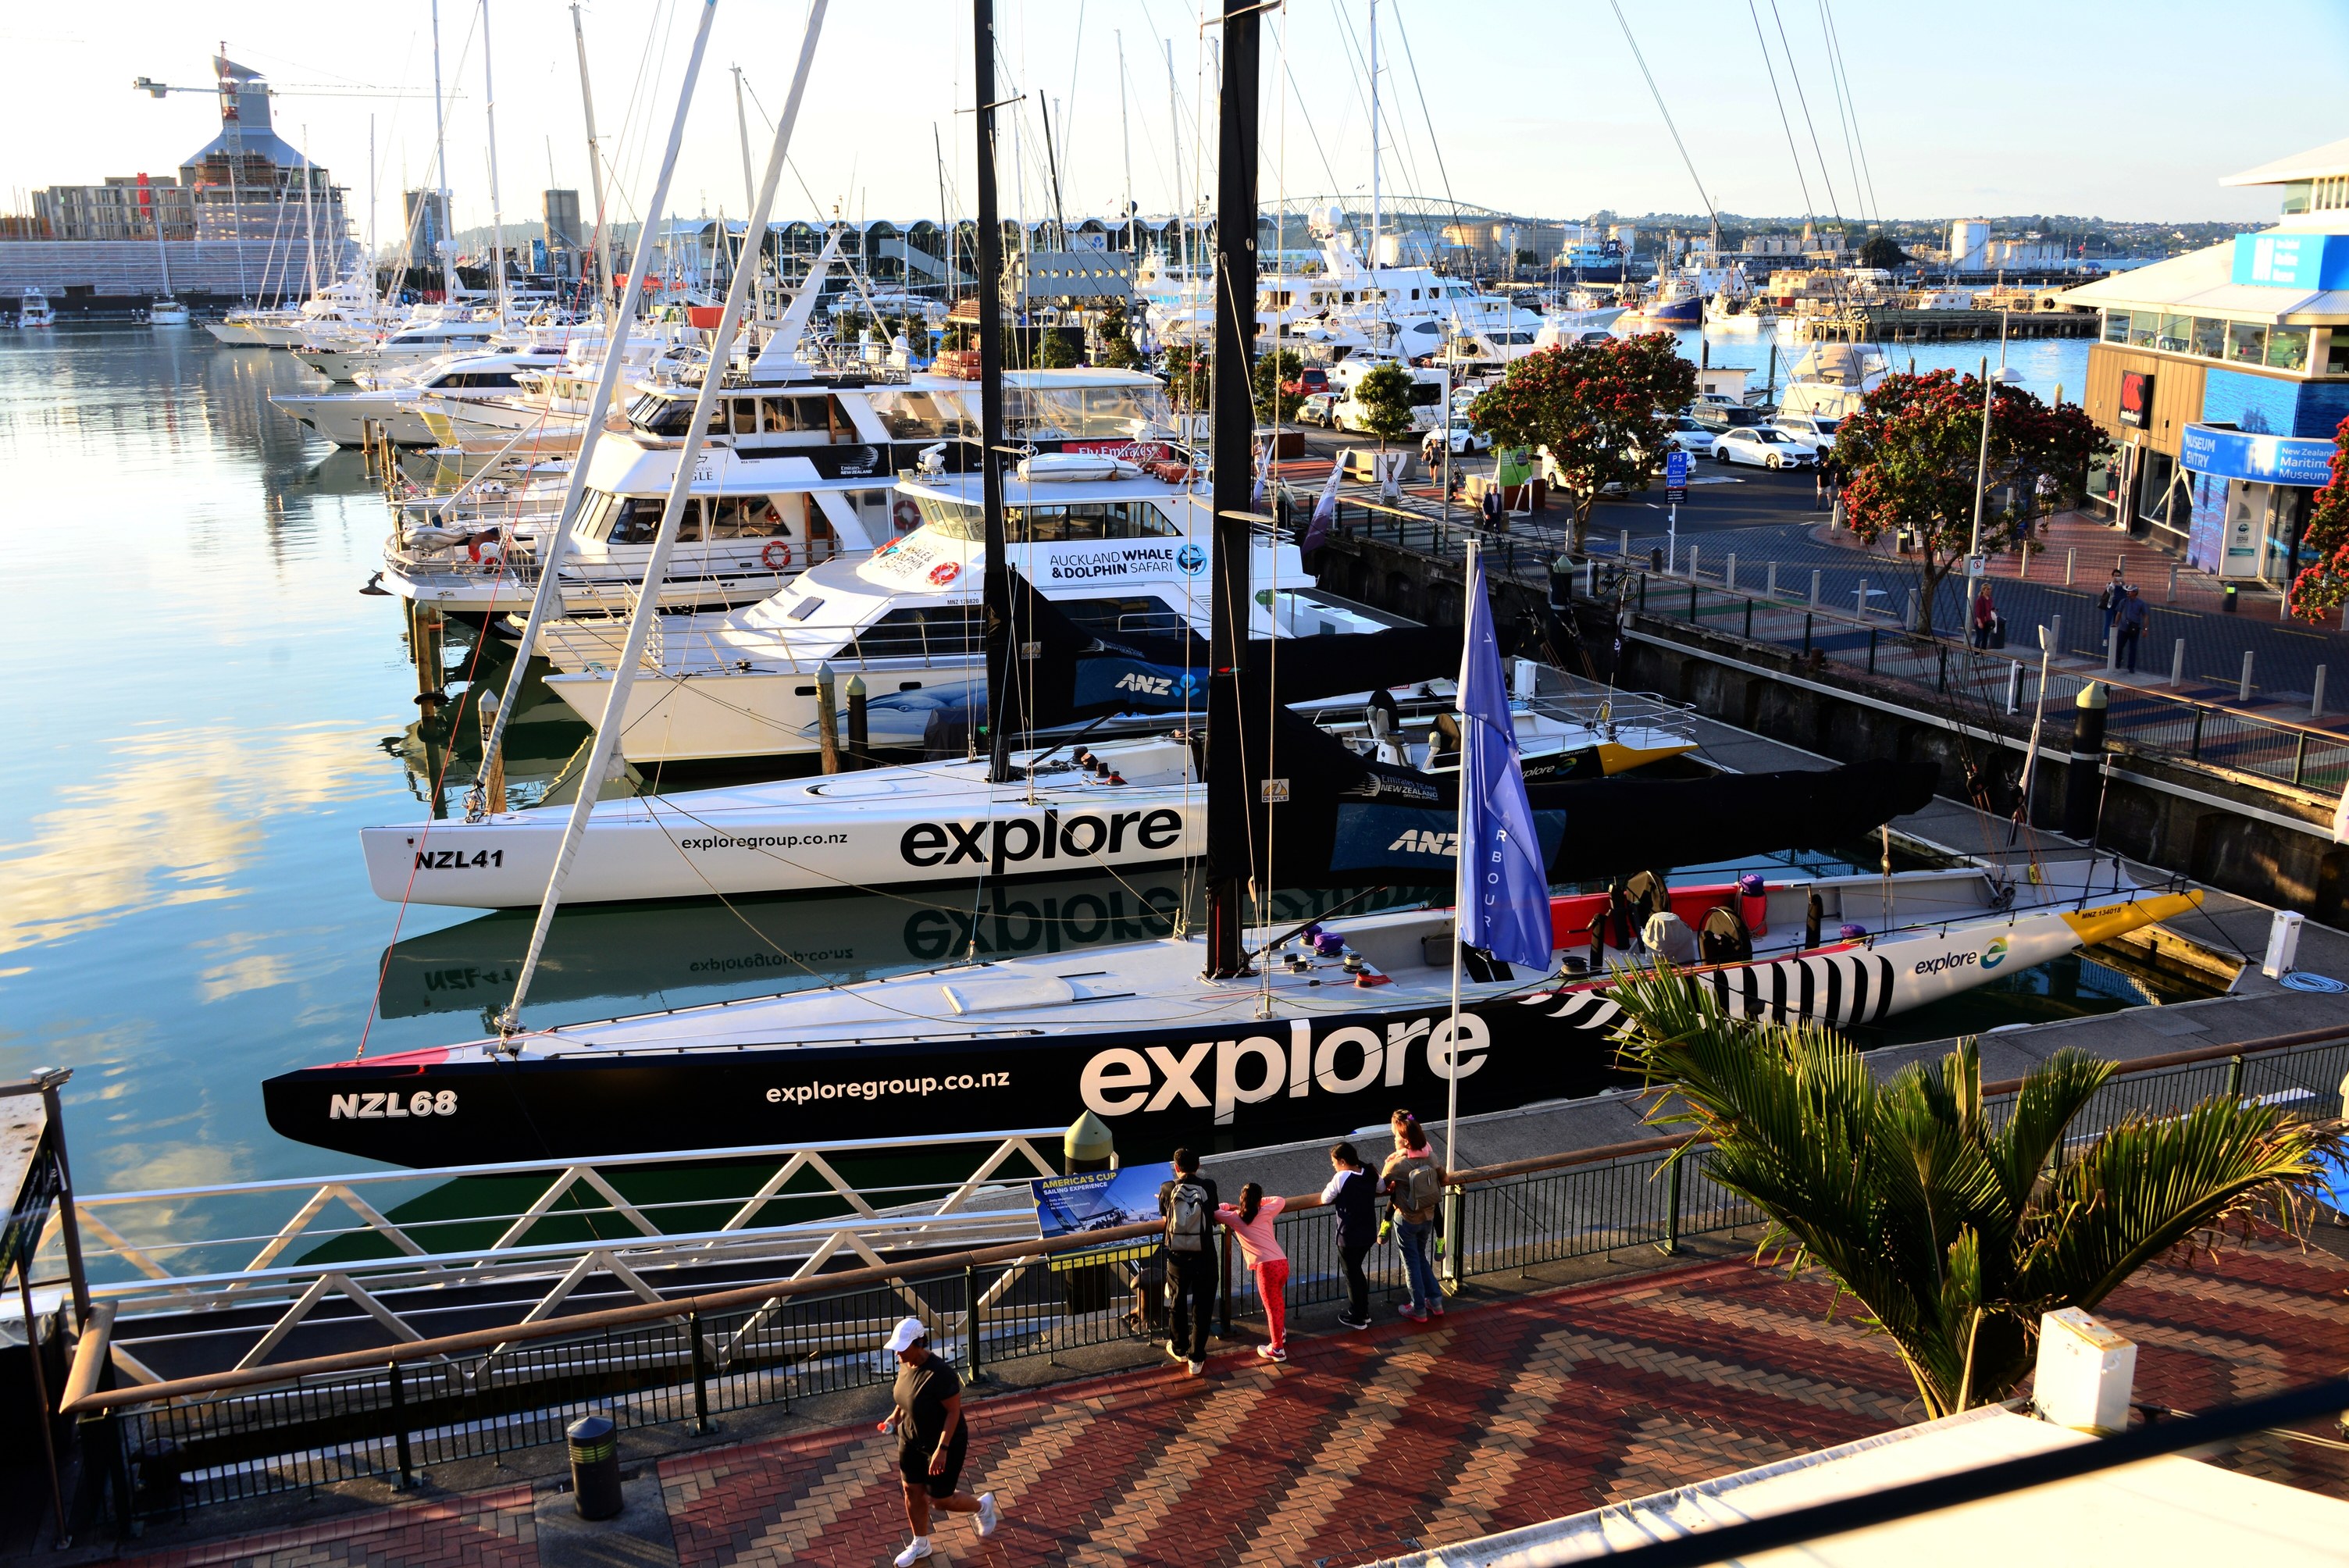 Explore sailing yachts docked at the Auckland Viaduct Harbour